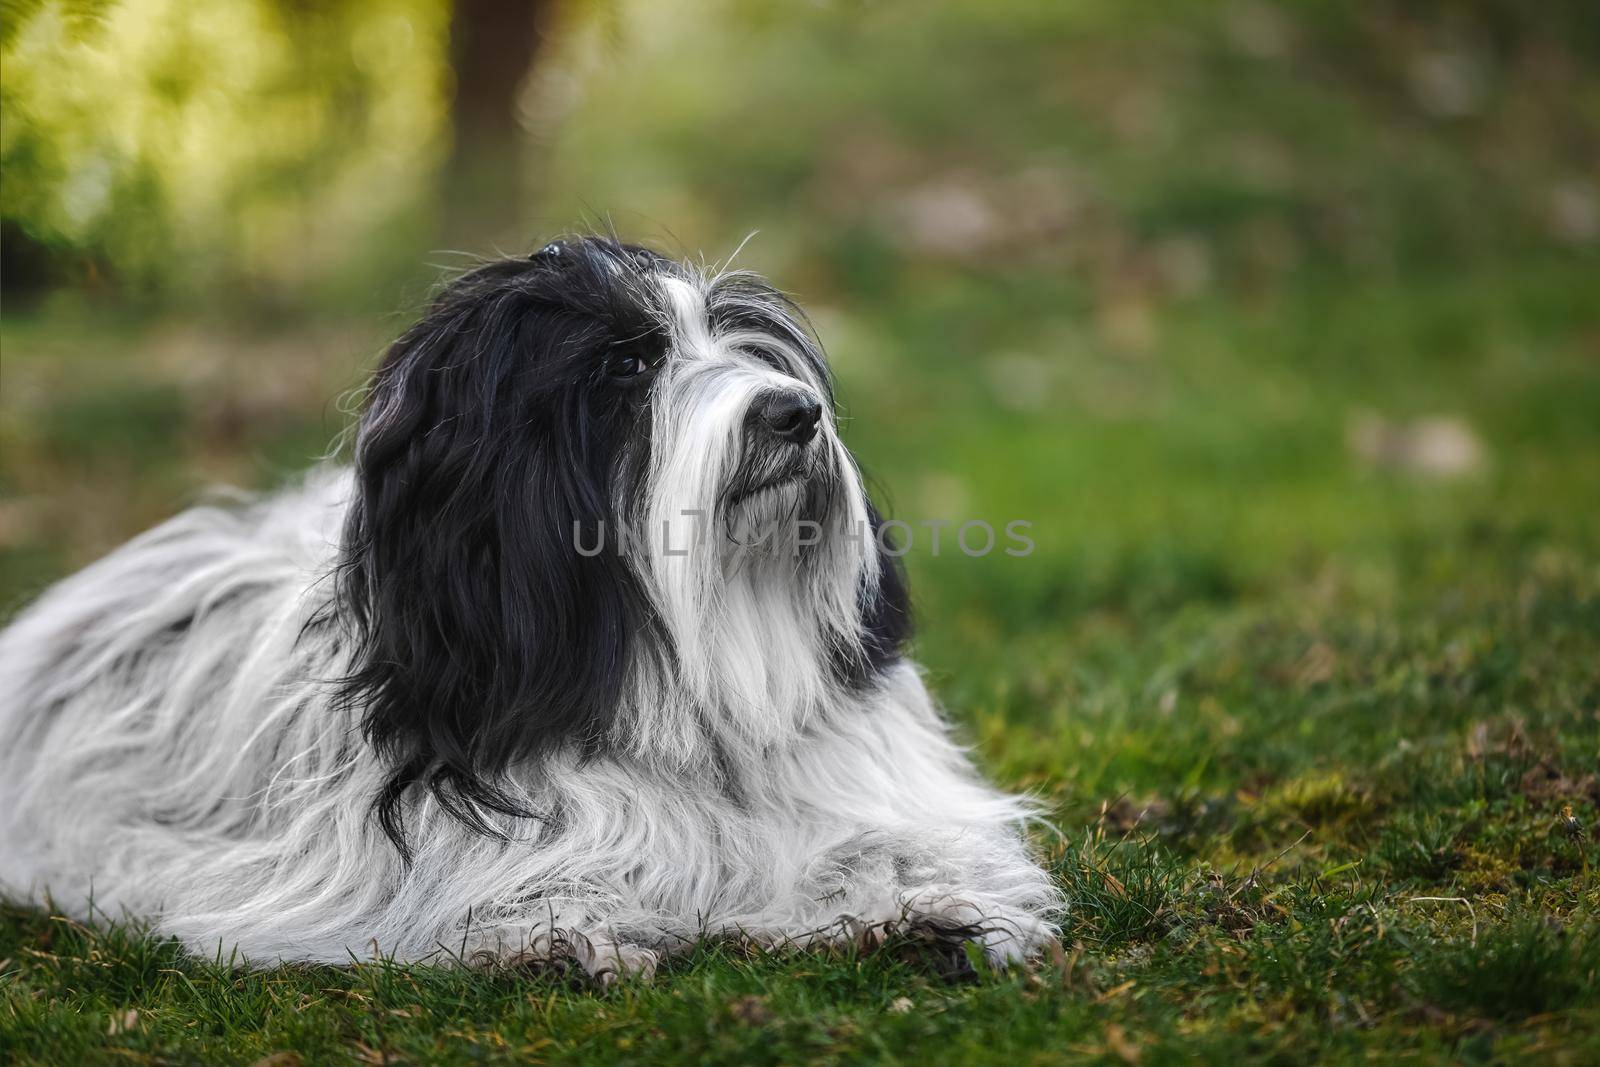 Tibetan terrier dog out for a walk relaxing in the nature in green grass field during spring.  Selective focus by Slast20